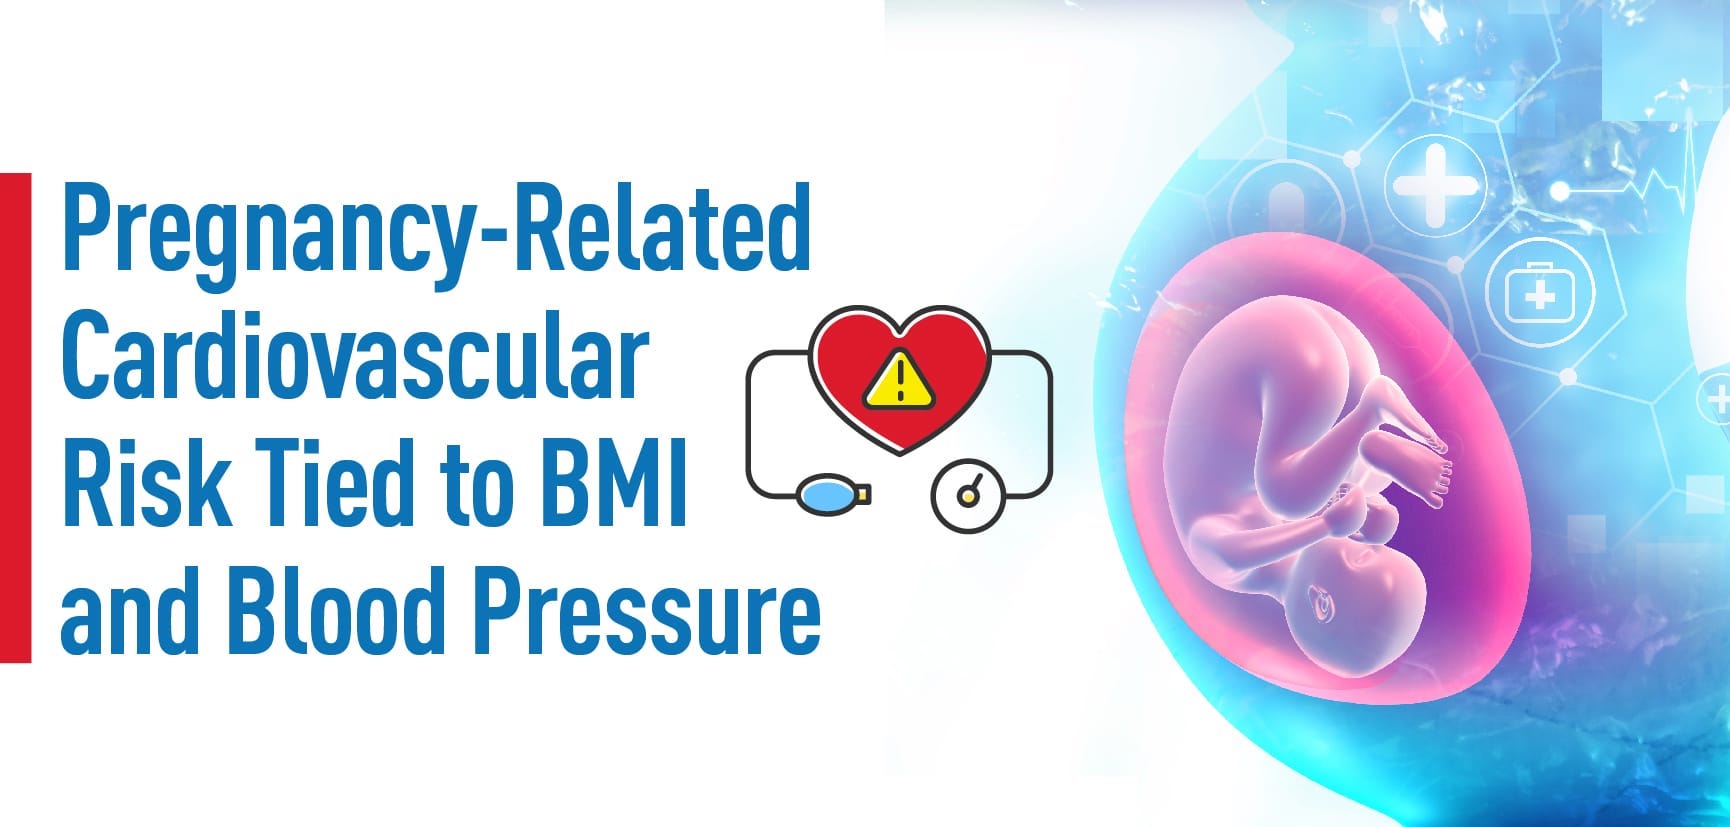 Pregnancy Related Cardiovascular Risk Tied To BMI 081221 01 Copy